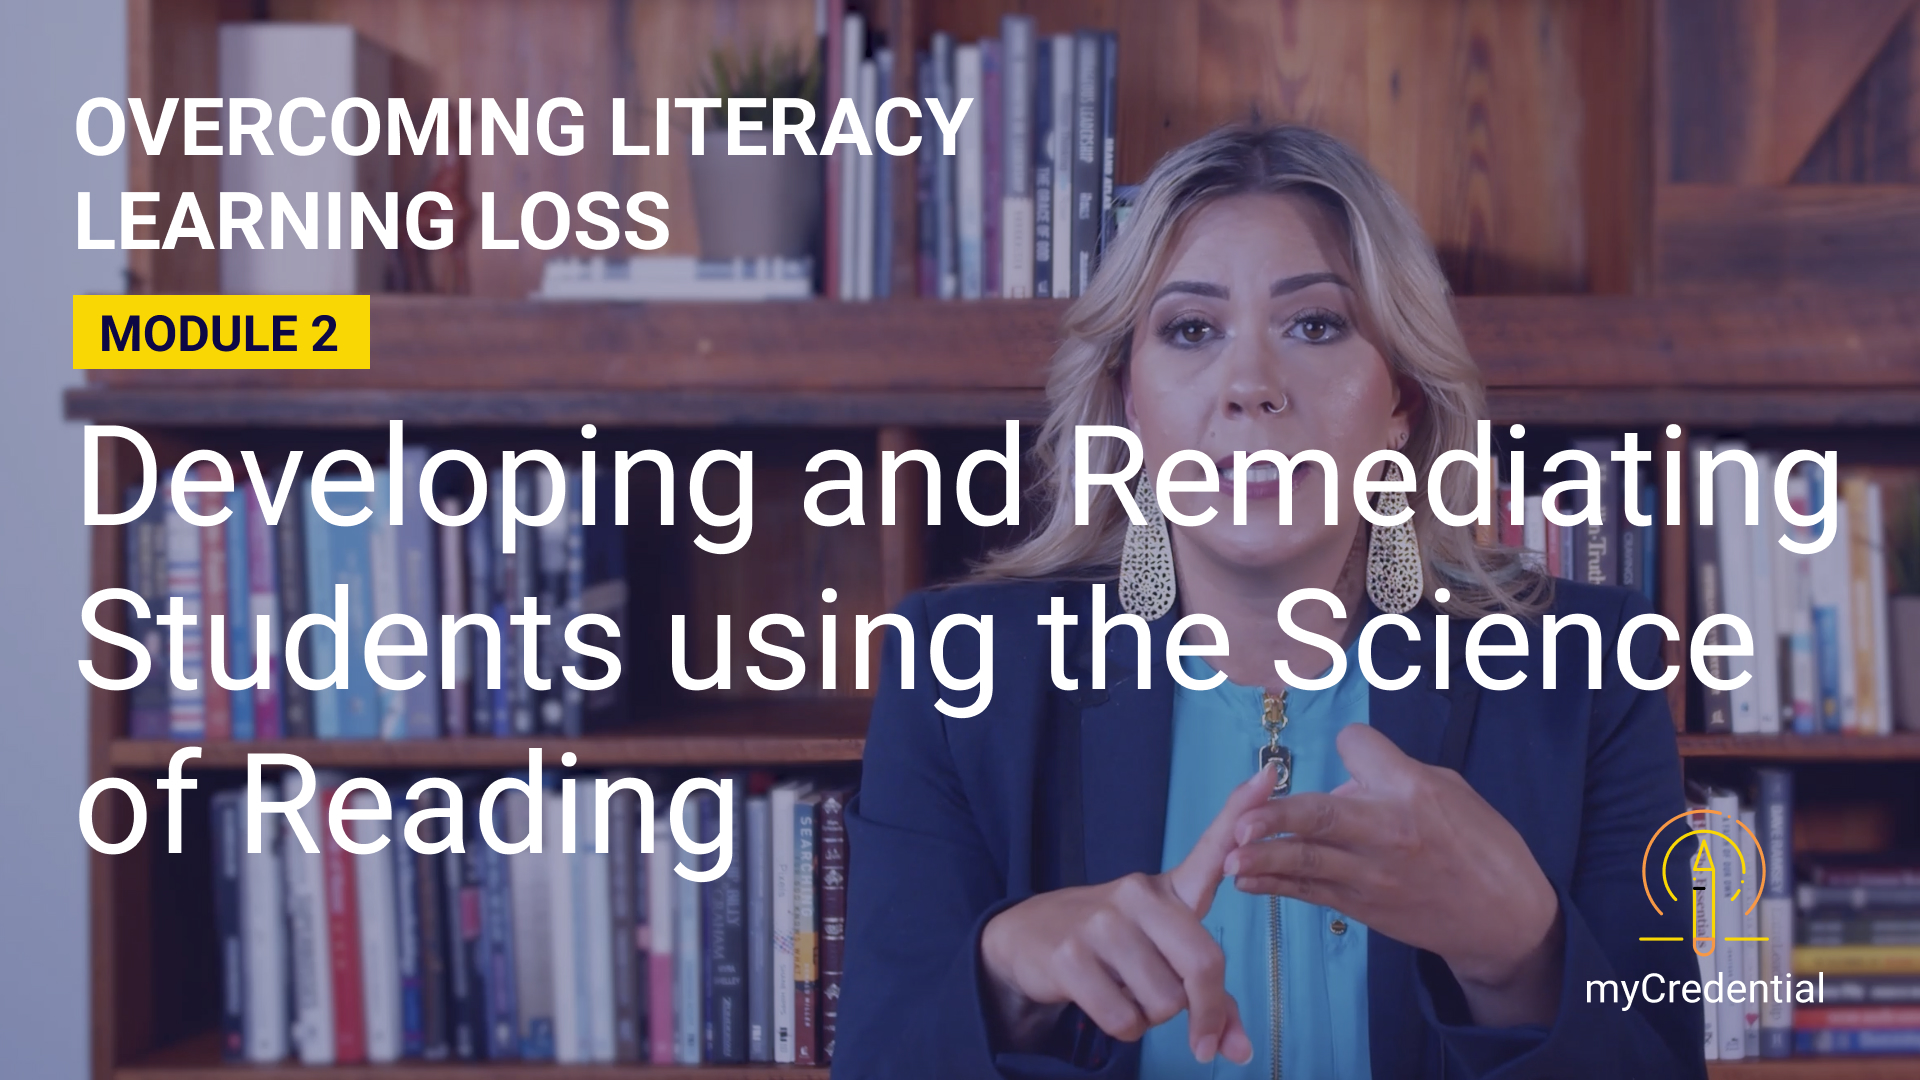 Overcoming Literacy Learning Loss (Module 2): Developing and Remediating Students Using the Science of Reading